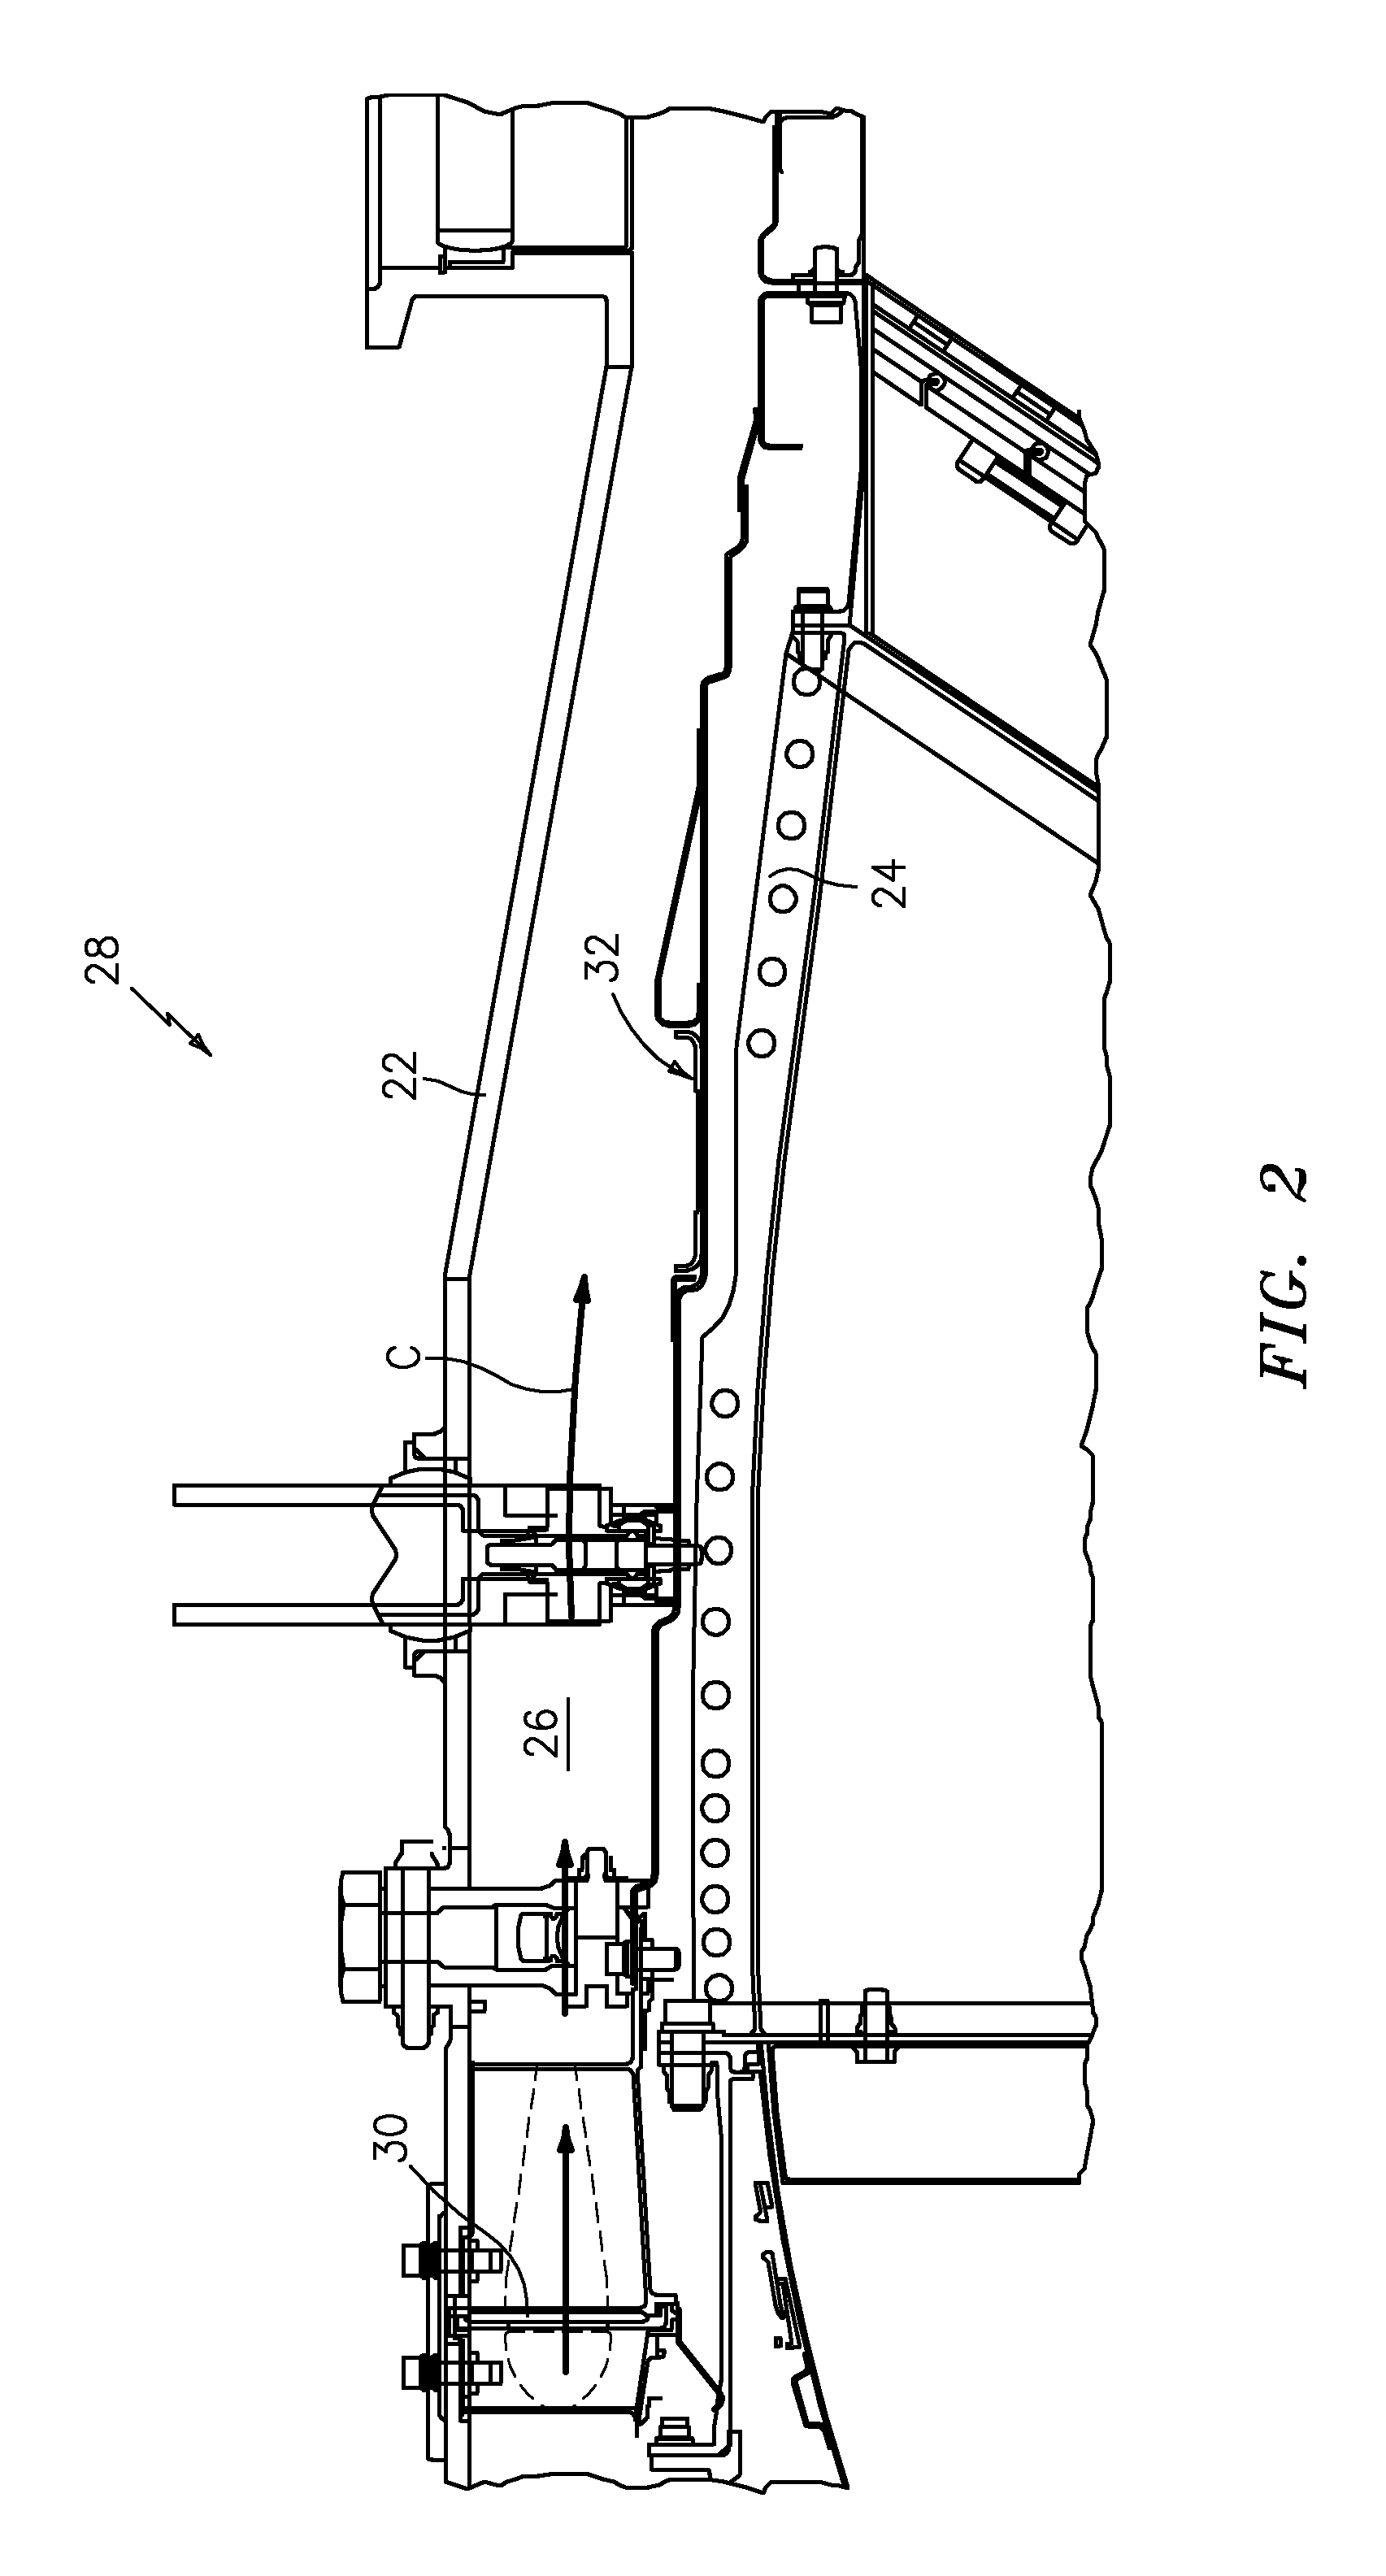 Linkage system with wear reduction